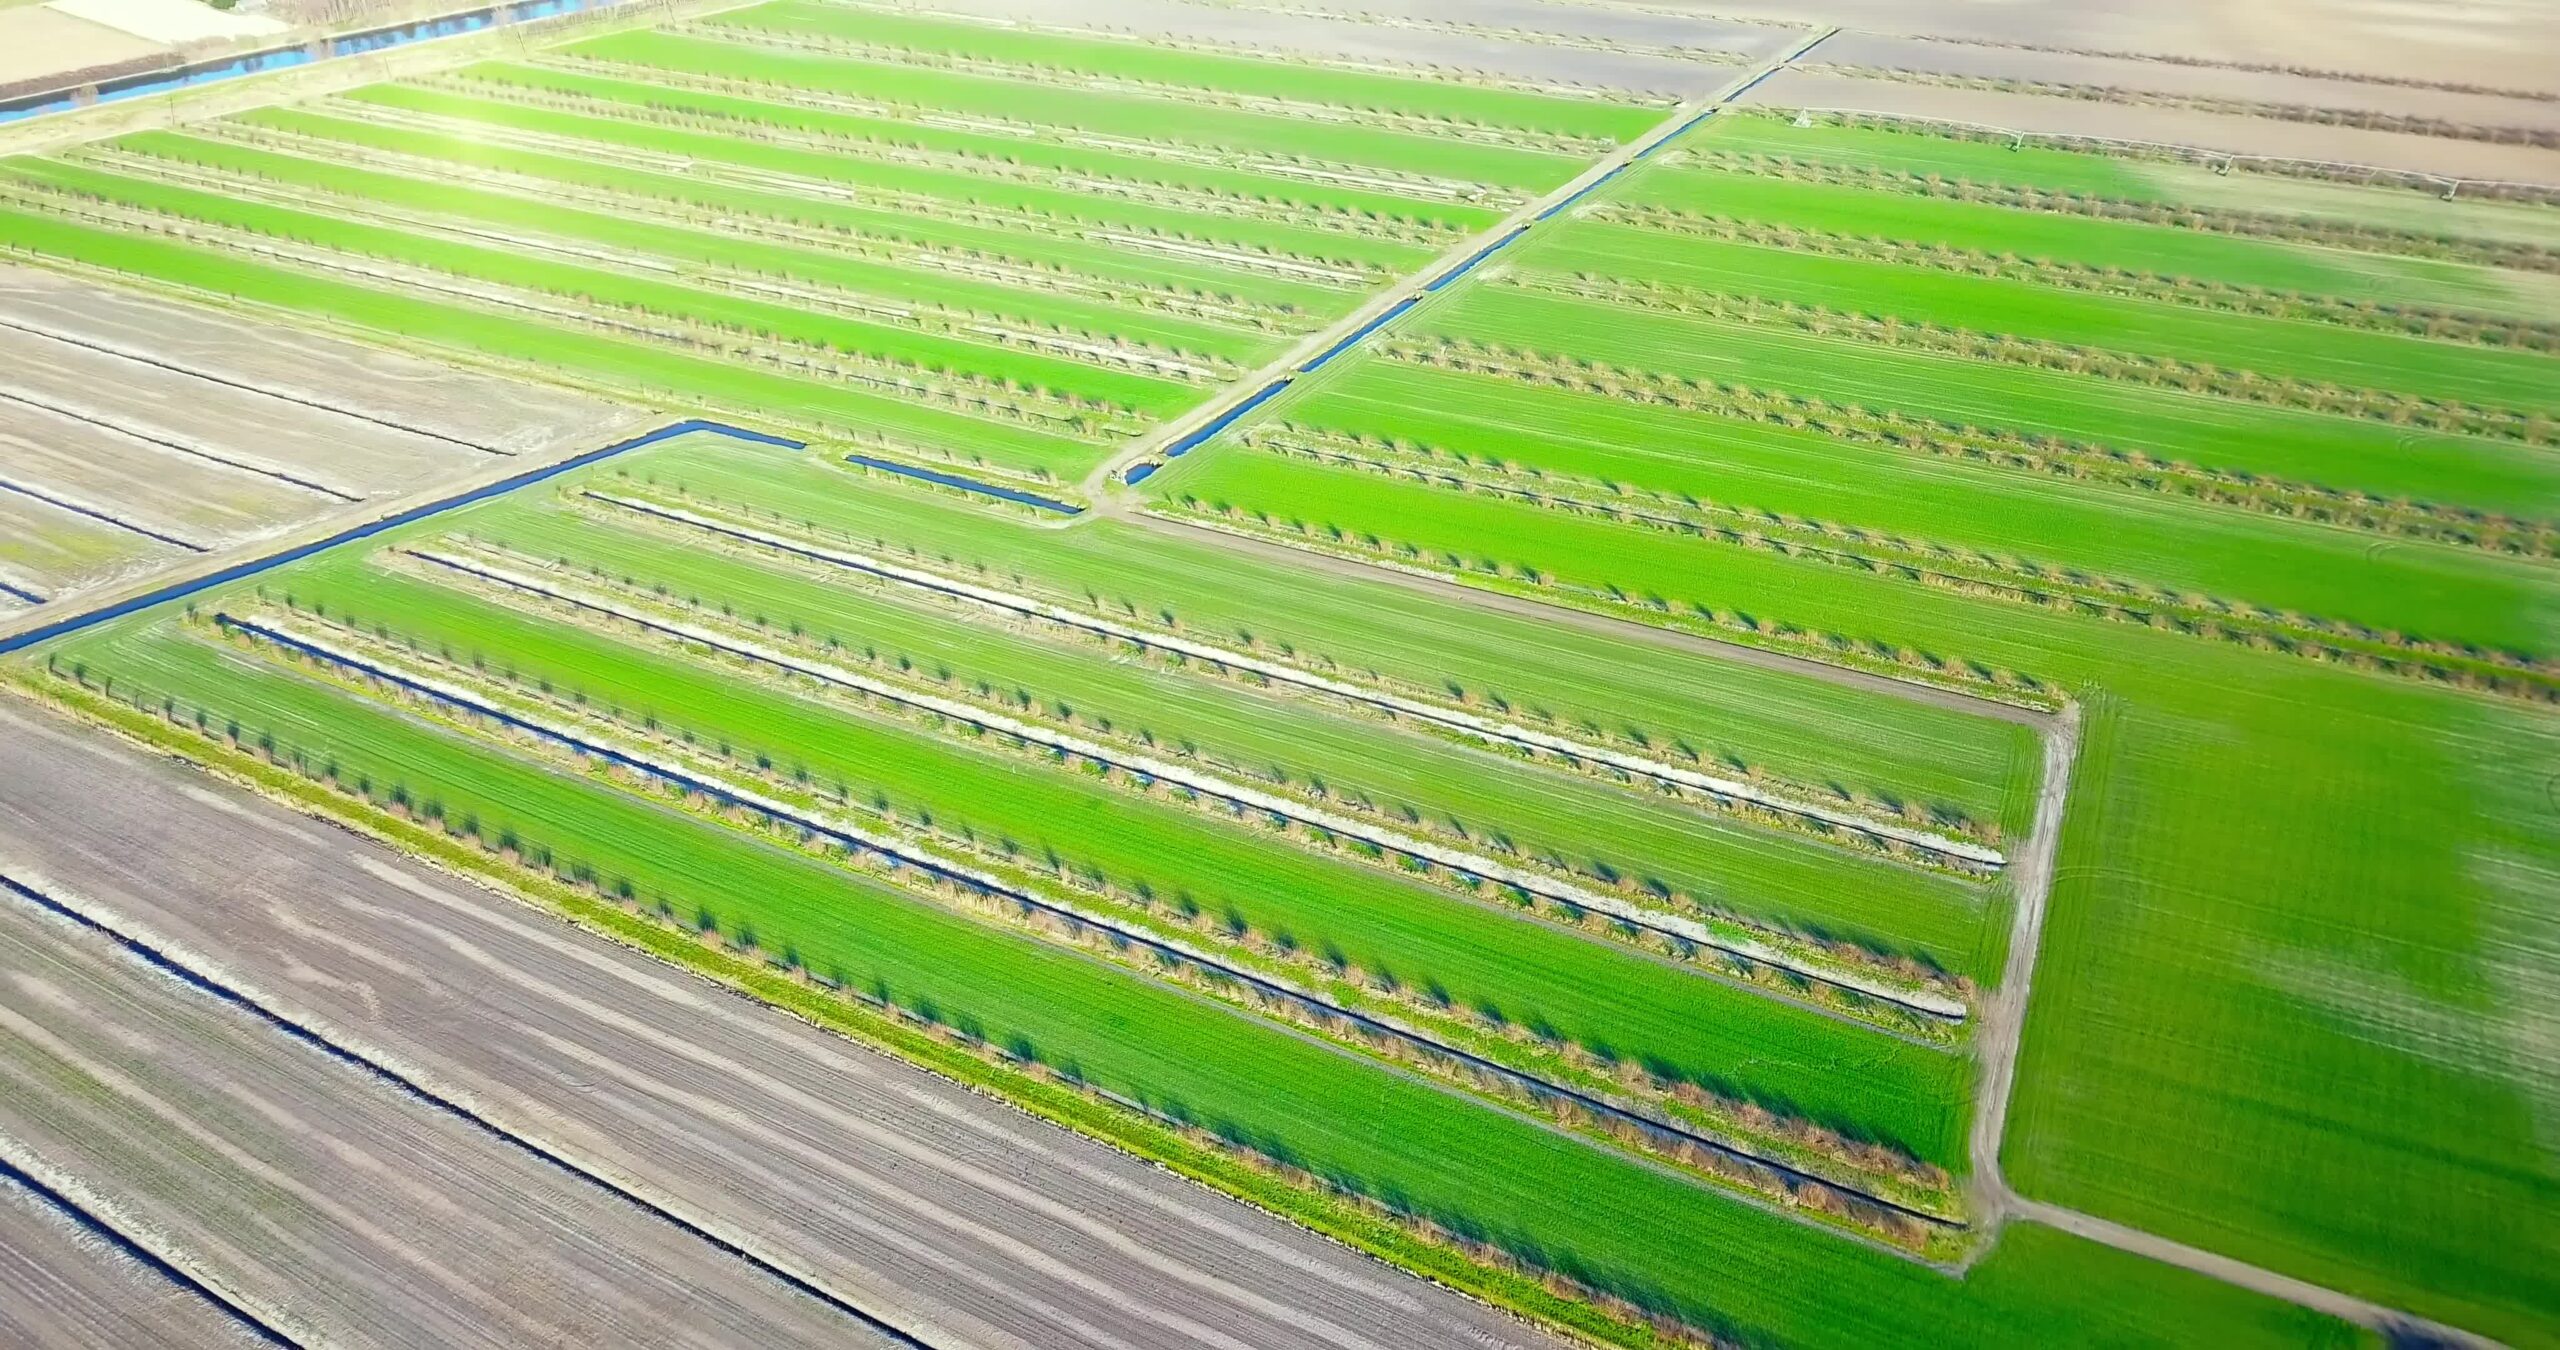 Irrigation canals divide perfectly shaped juicy green fields